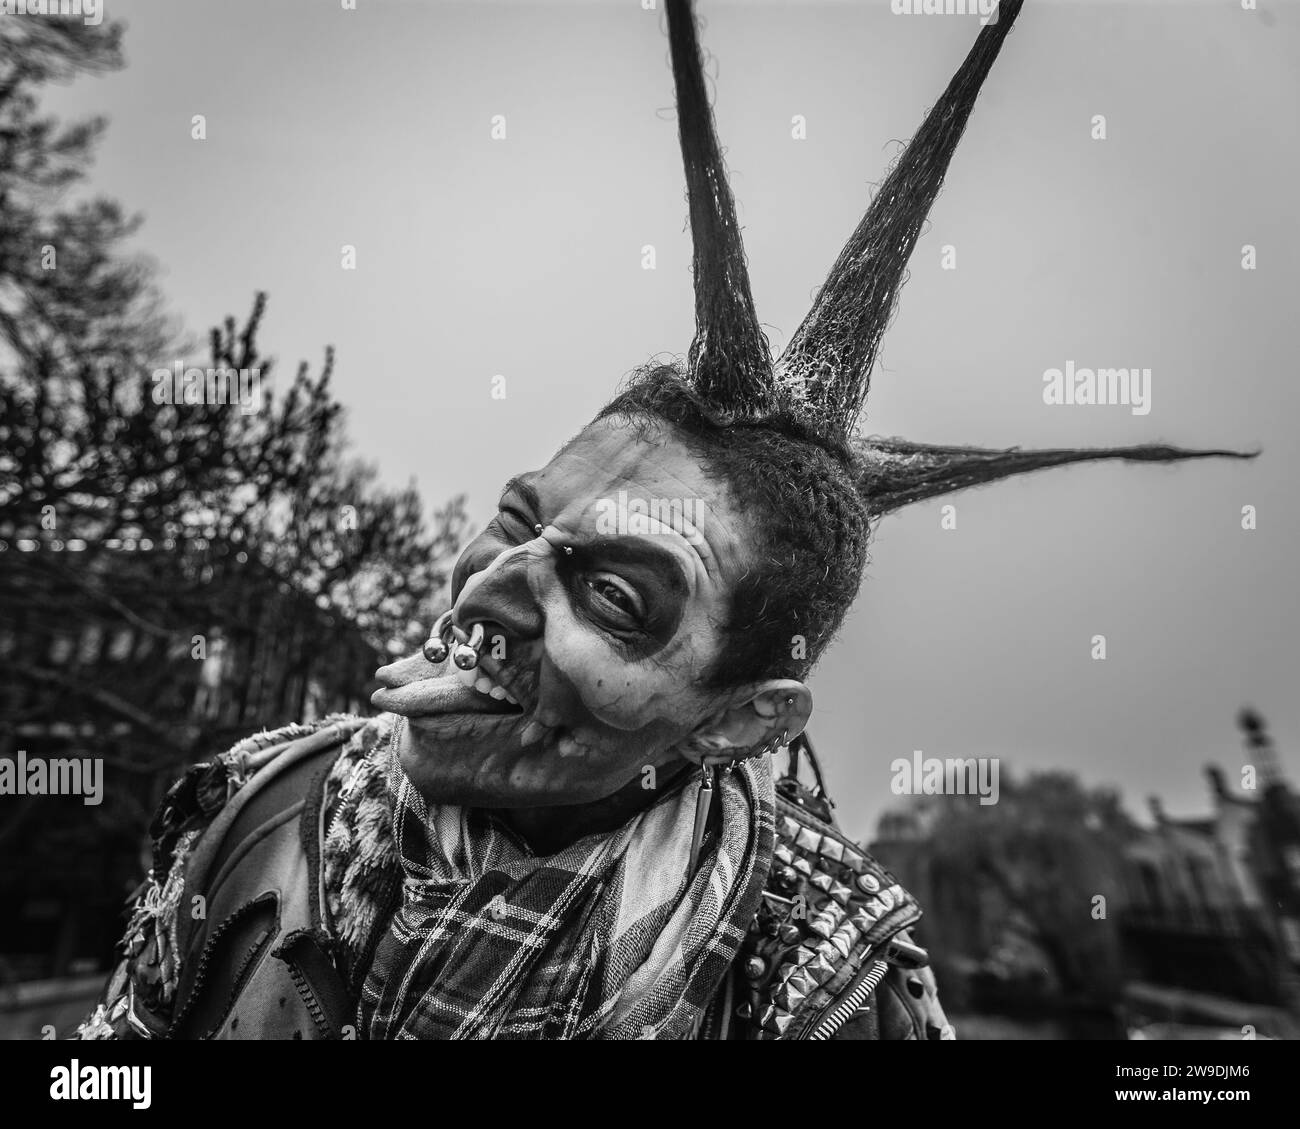 Black and white image of a portrait of ZombiePunk in London's Camden. Stock Photo